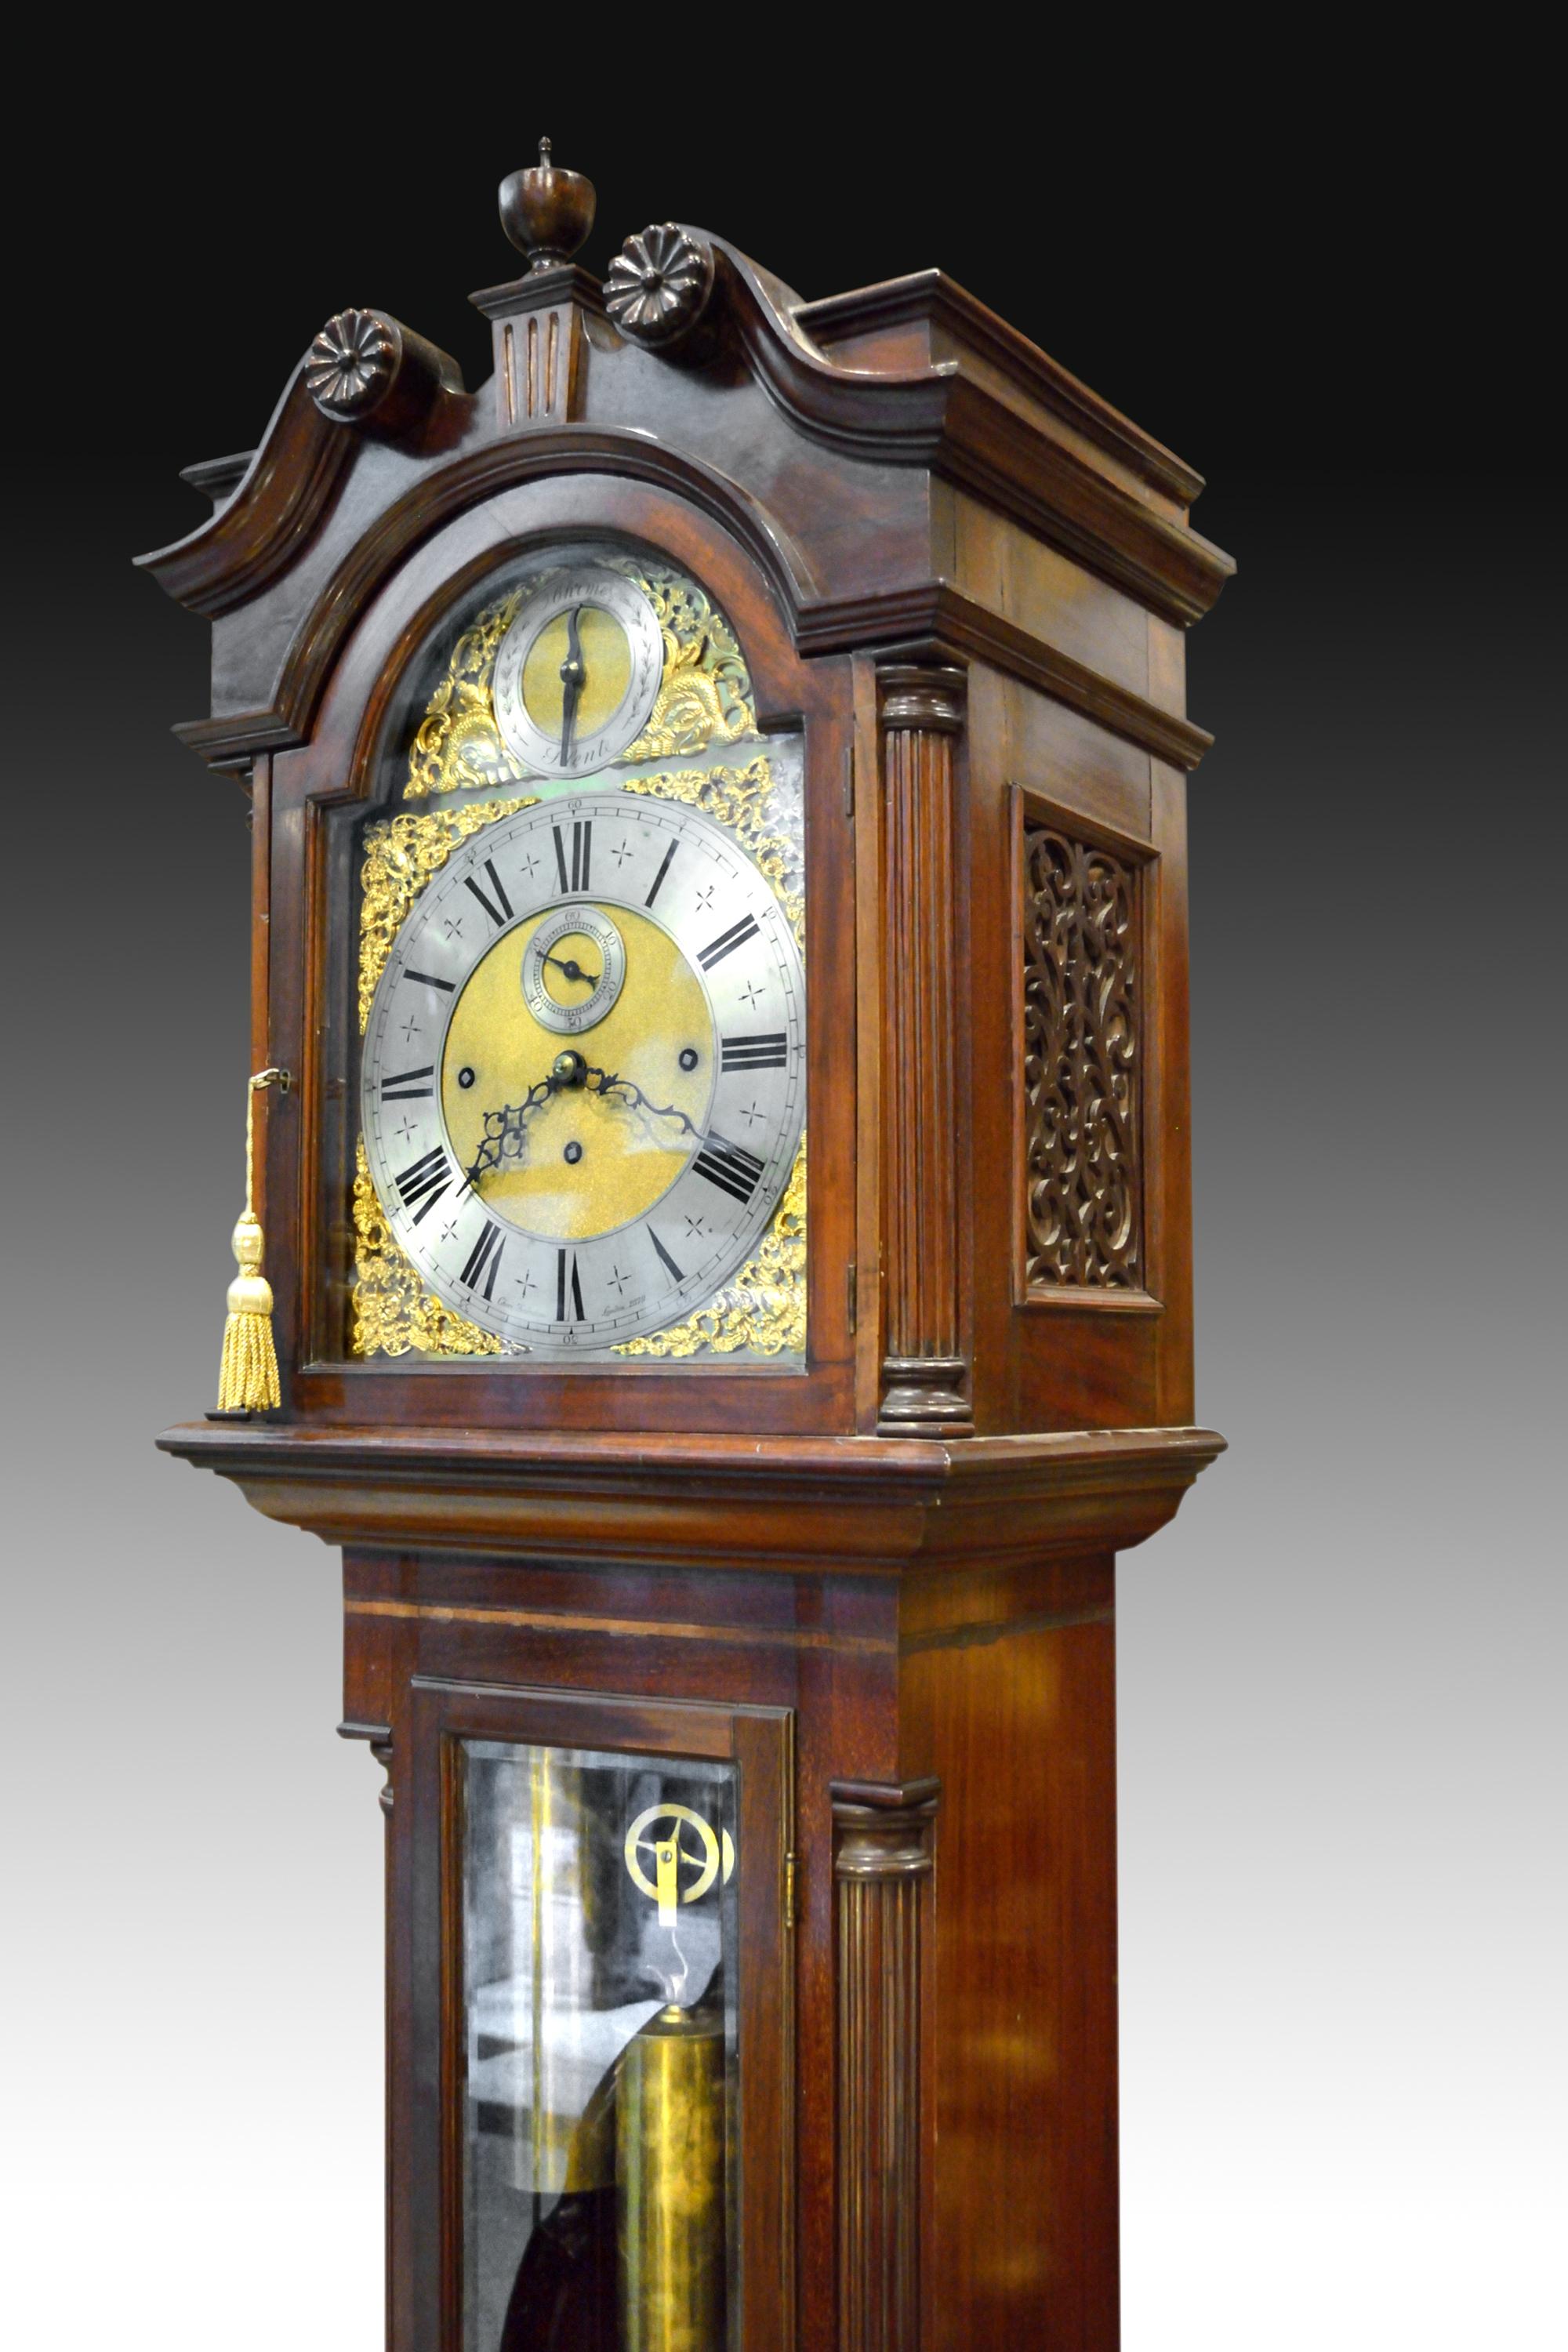 Grandfather longcase clock. Mahogany, metal, glass, Charles Frodsham, London, England, en 19th century beginning 20th century.
In the lower area of the main sphere, the name of the manufacturer and a serial number can be seen, allowing the piece to